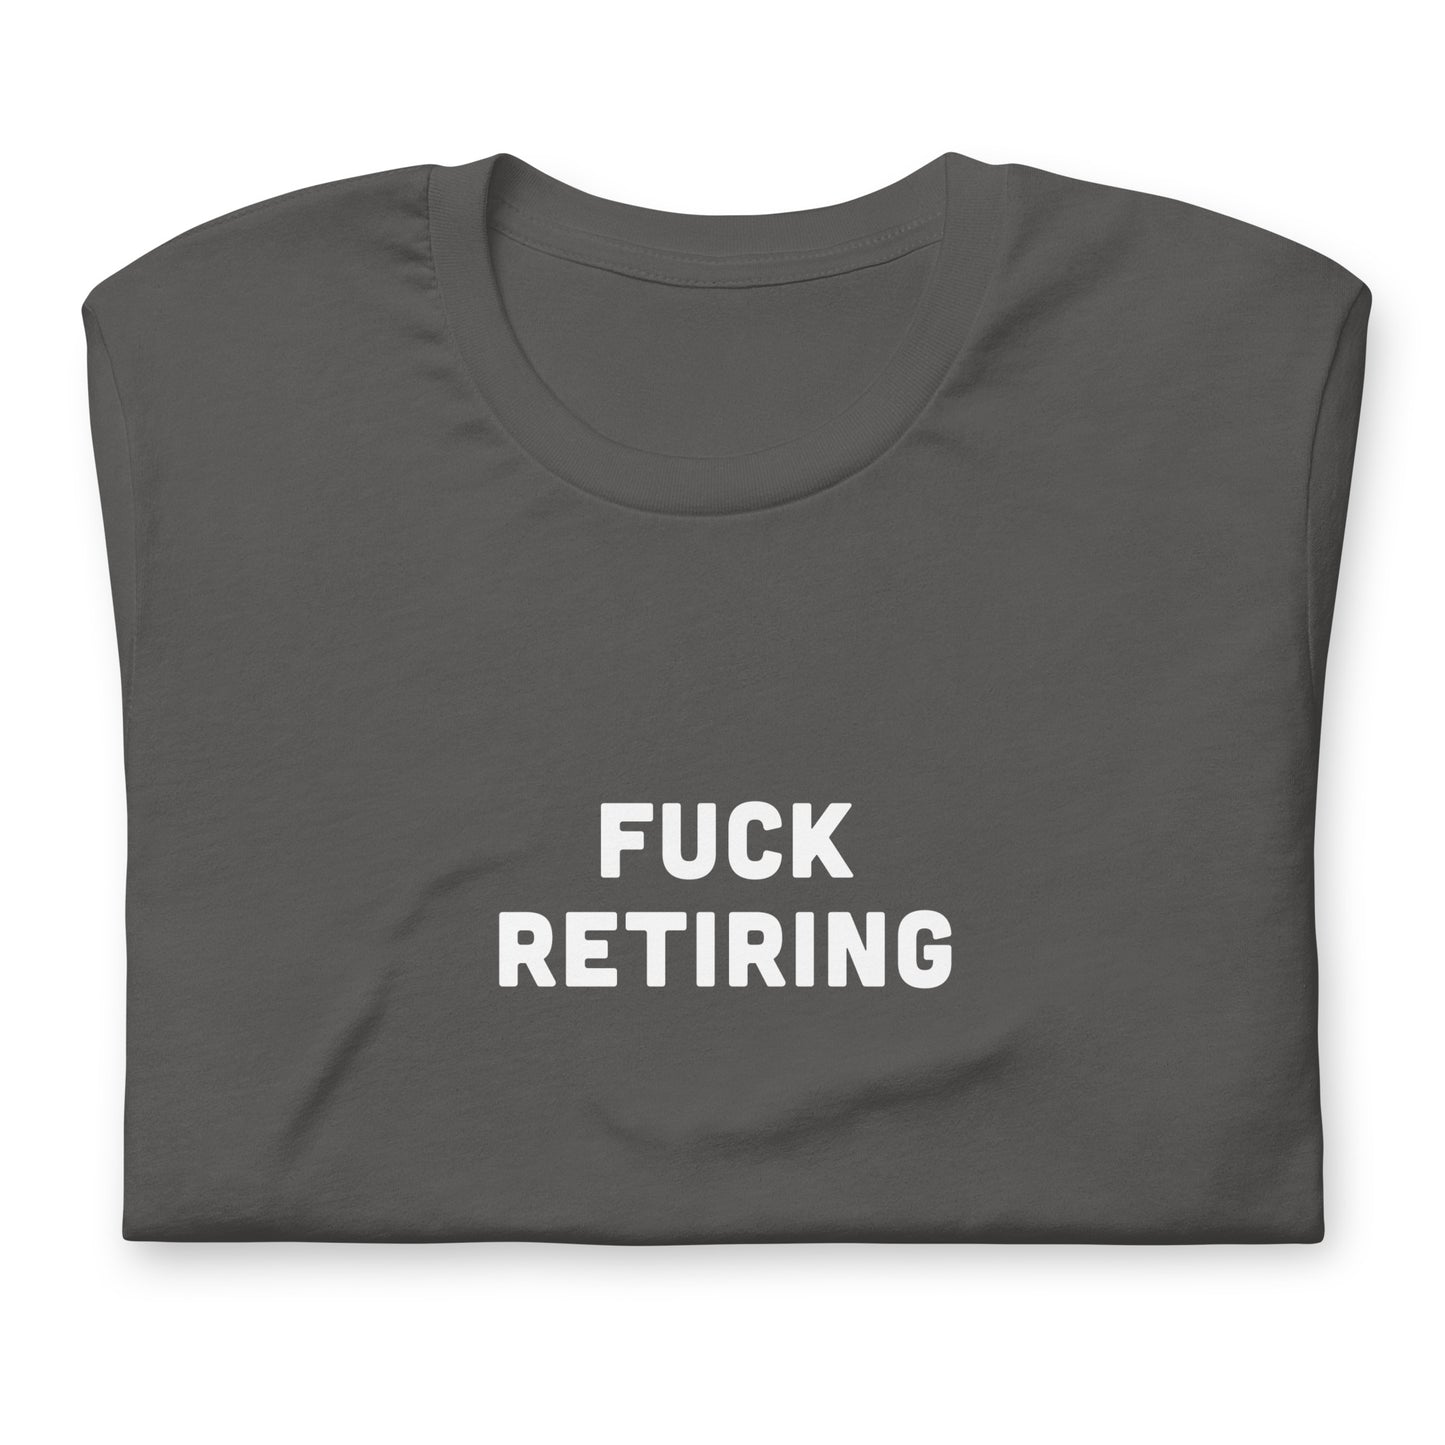 Fuck Retiring T-Shirt Size S Color Navy